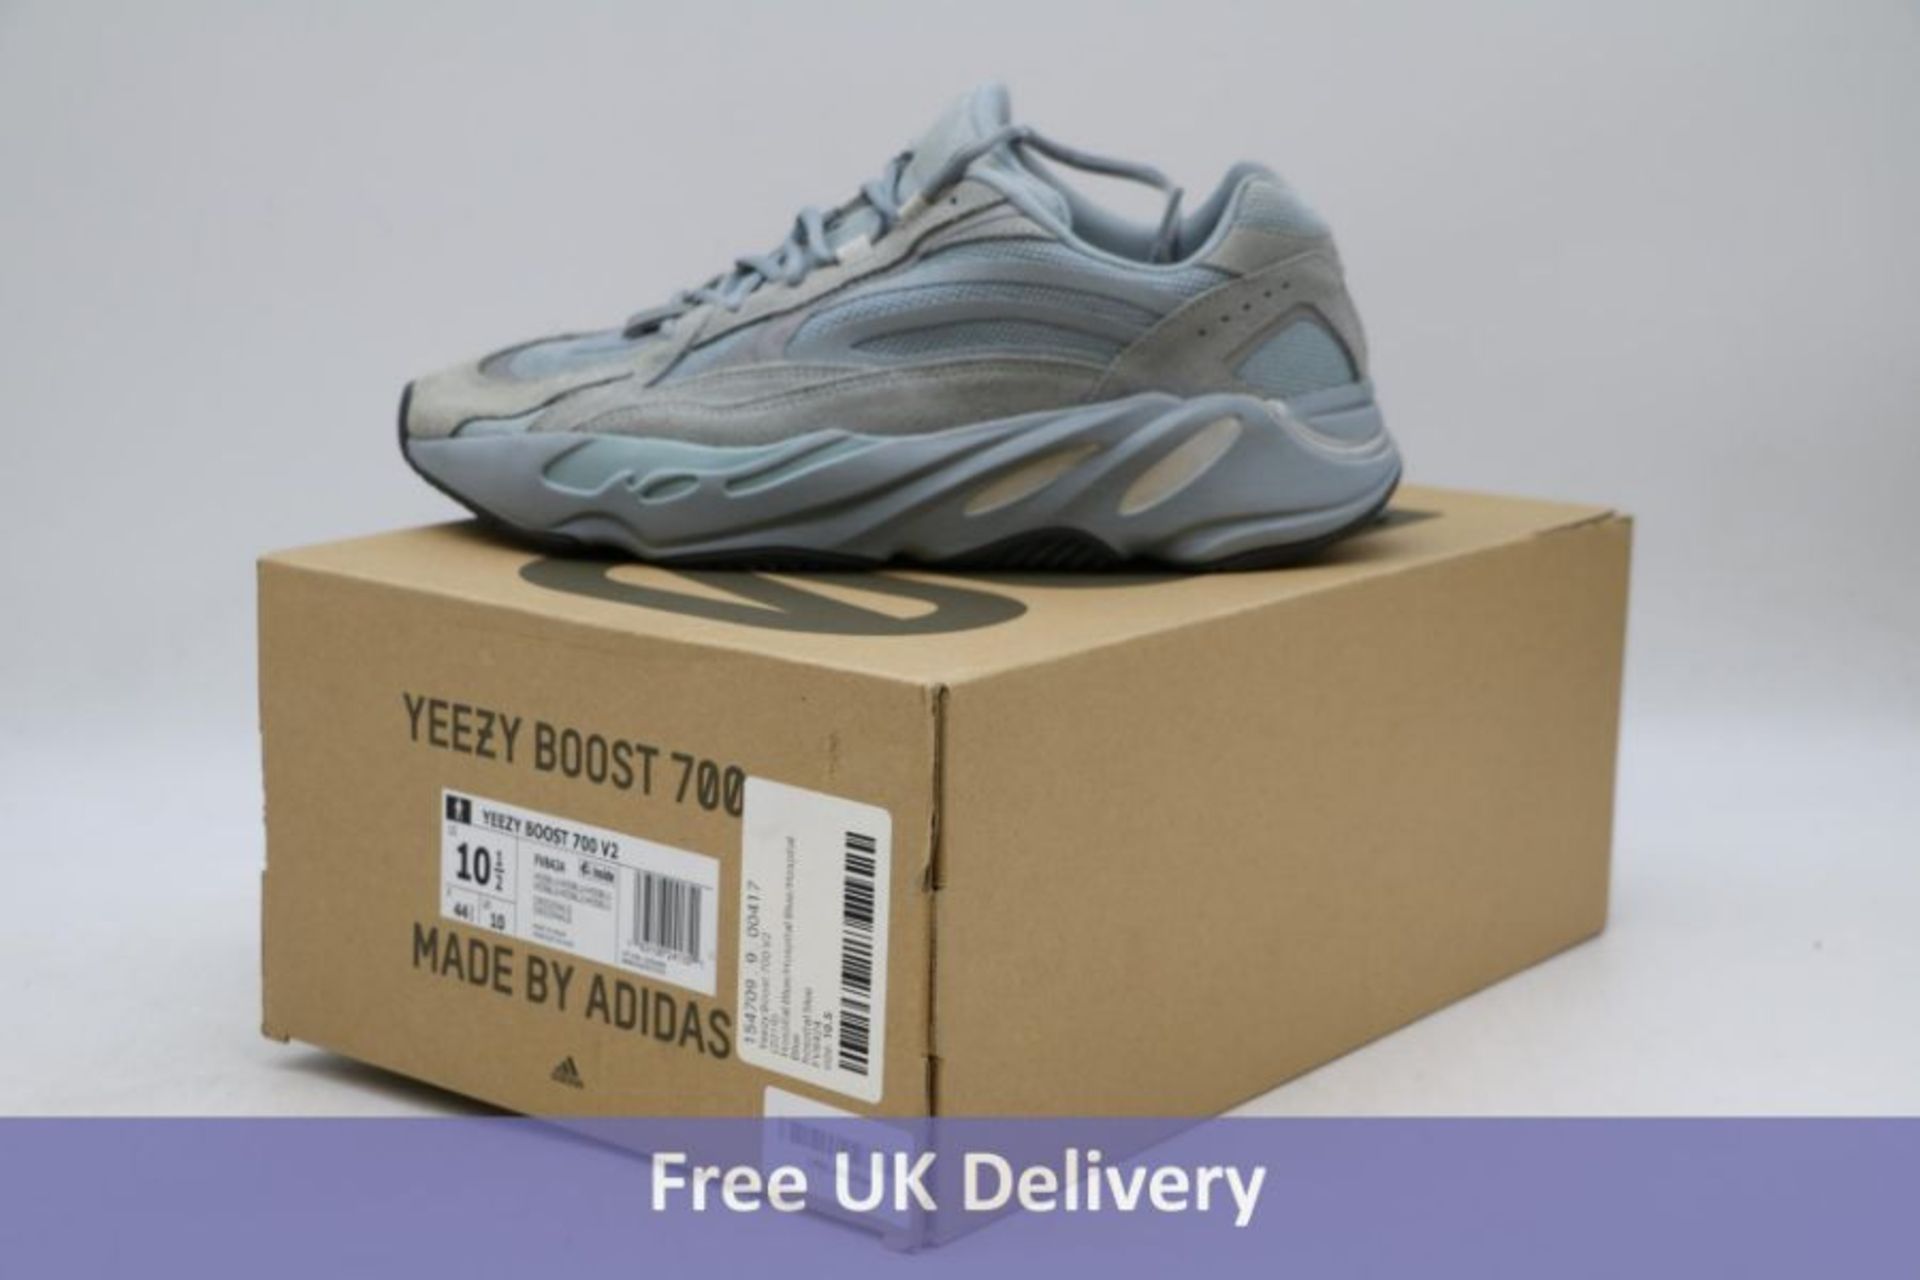 Adidas Yeezy Boost 700 V2 Trainers, Hospital Blue, UK 10, with Original Box. Used, Good Condition, S